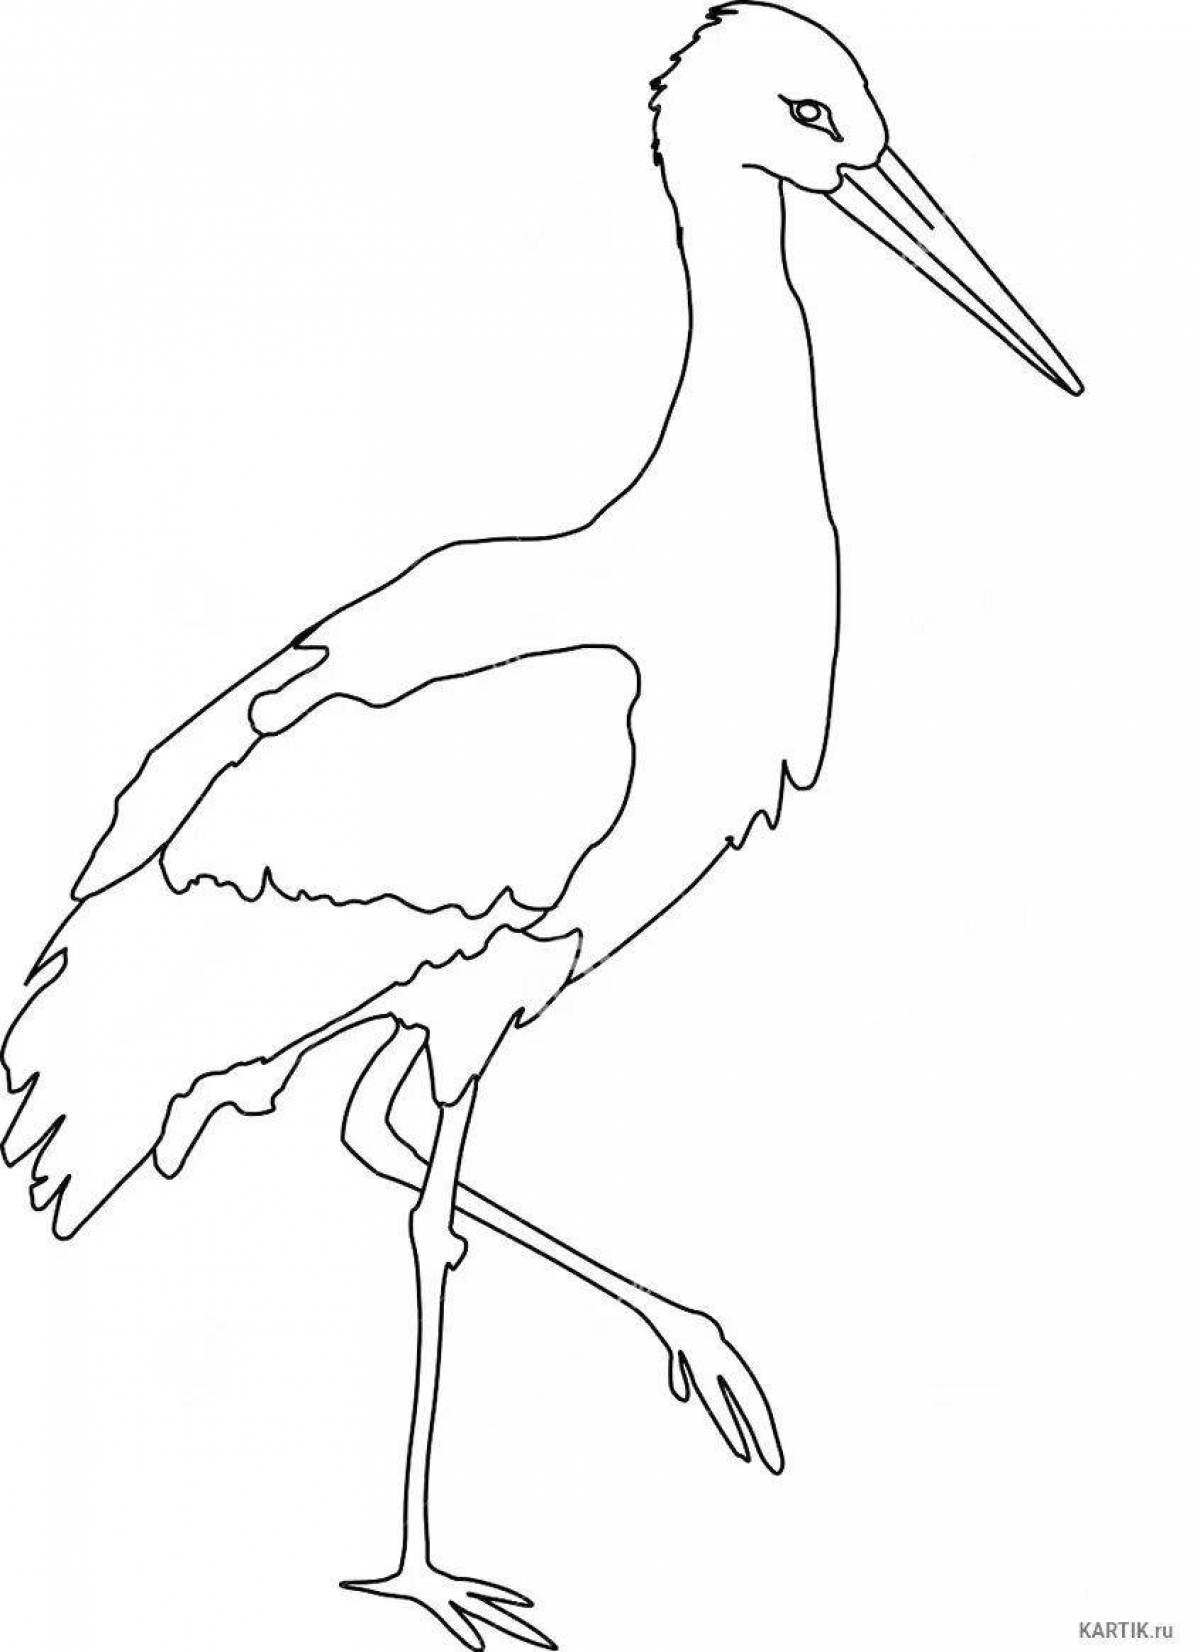 Gorgeous black stork coloring book for kids